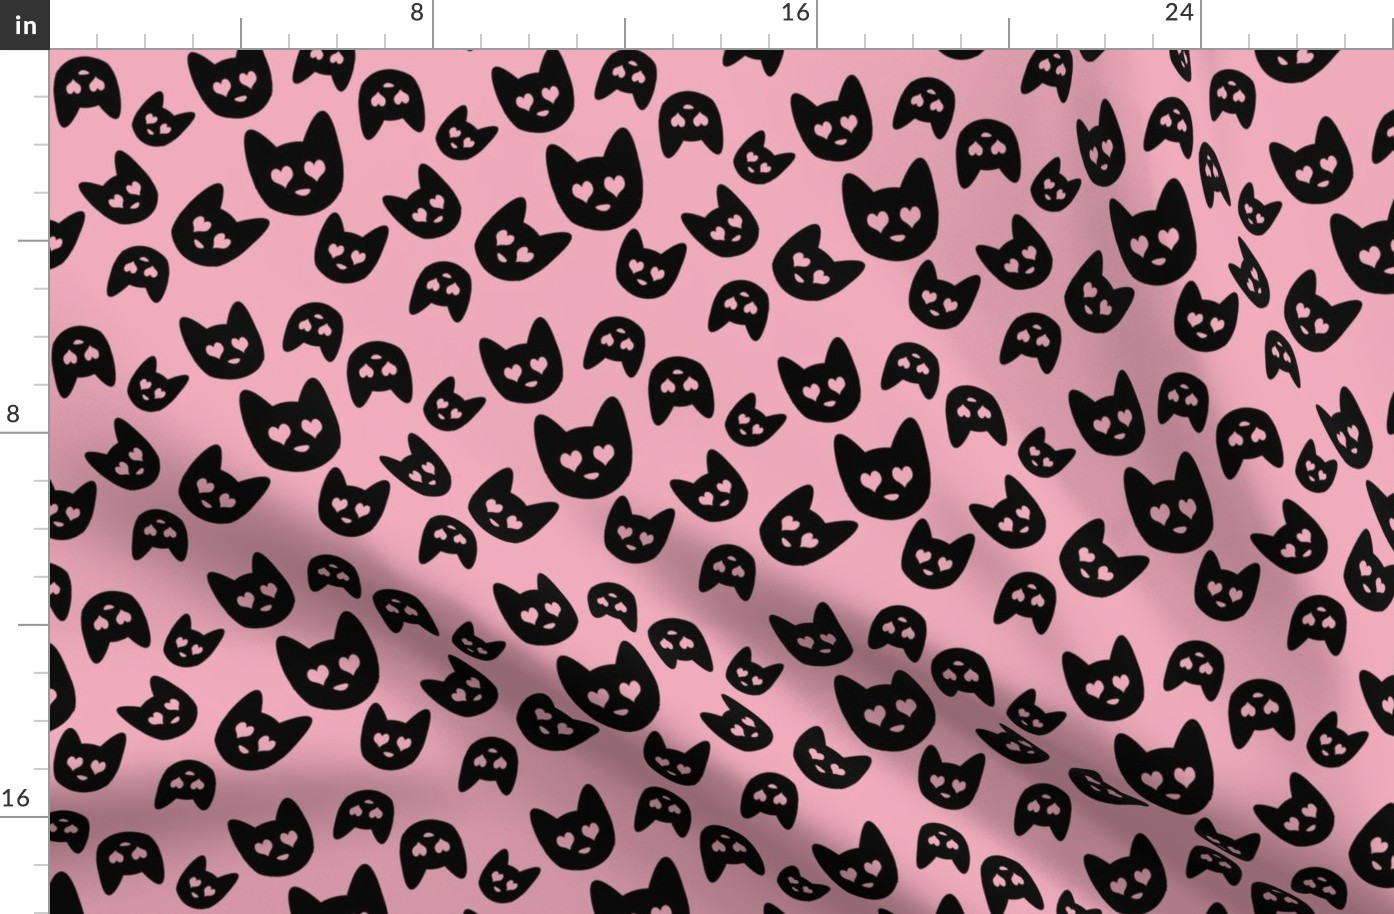 Love Cats on Pink